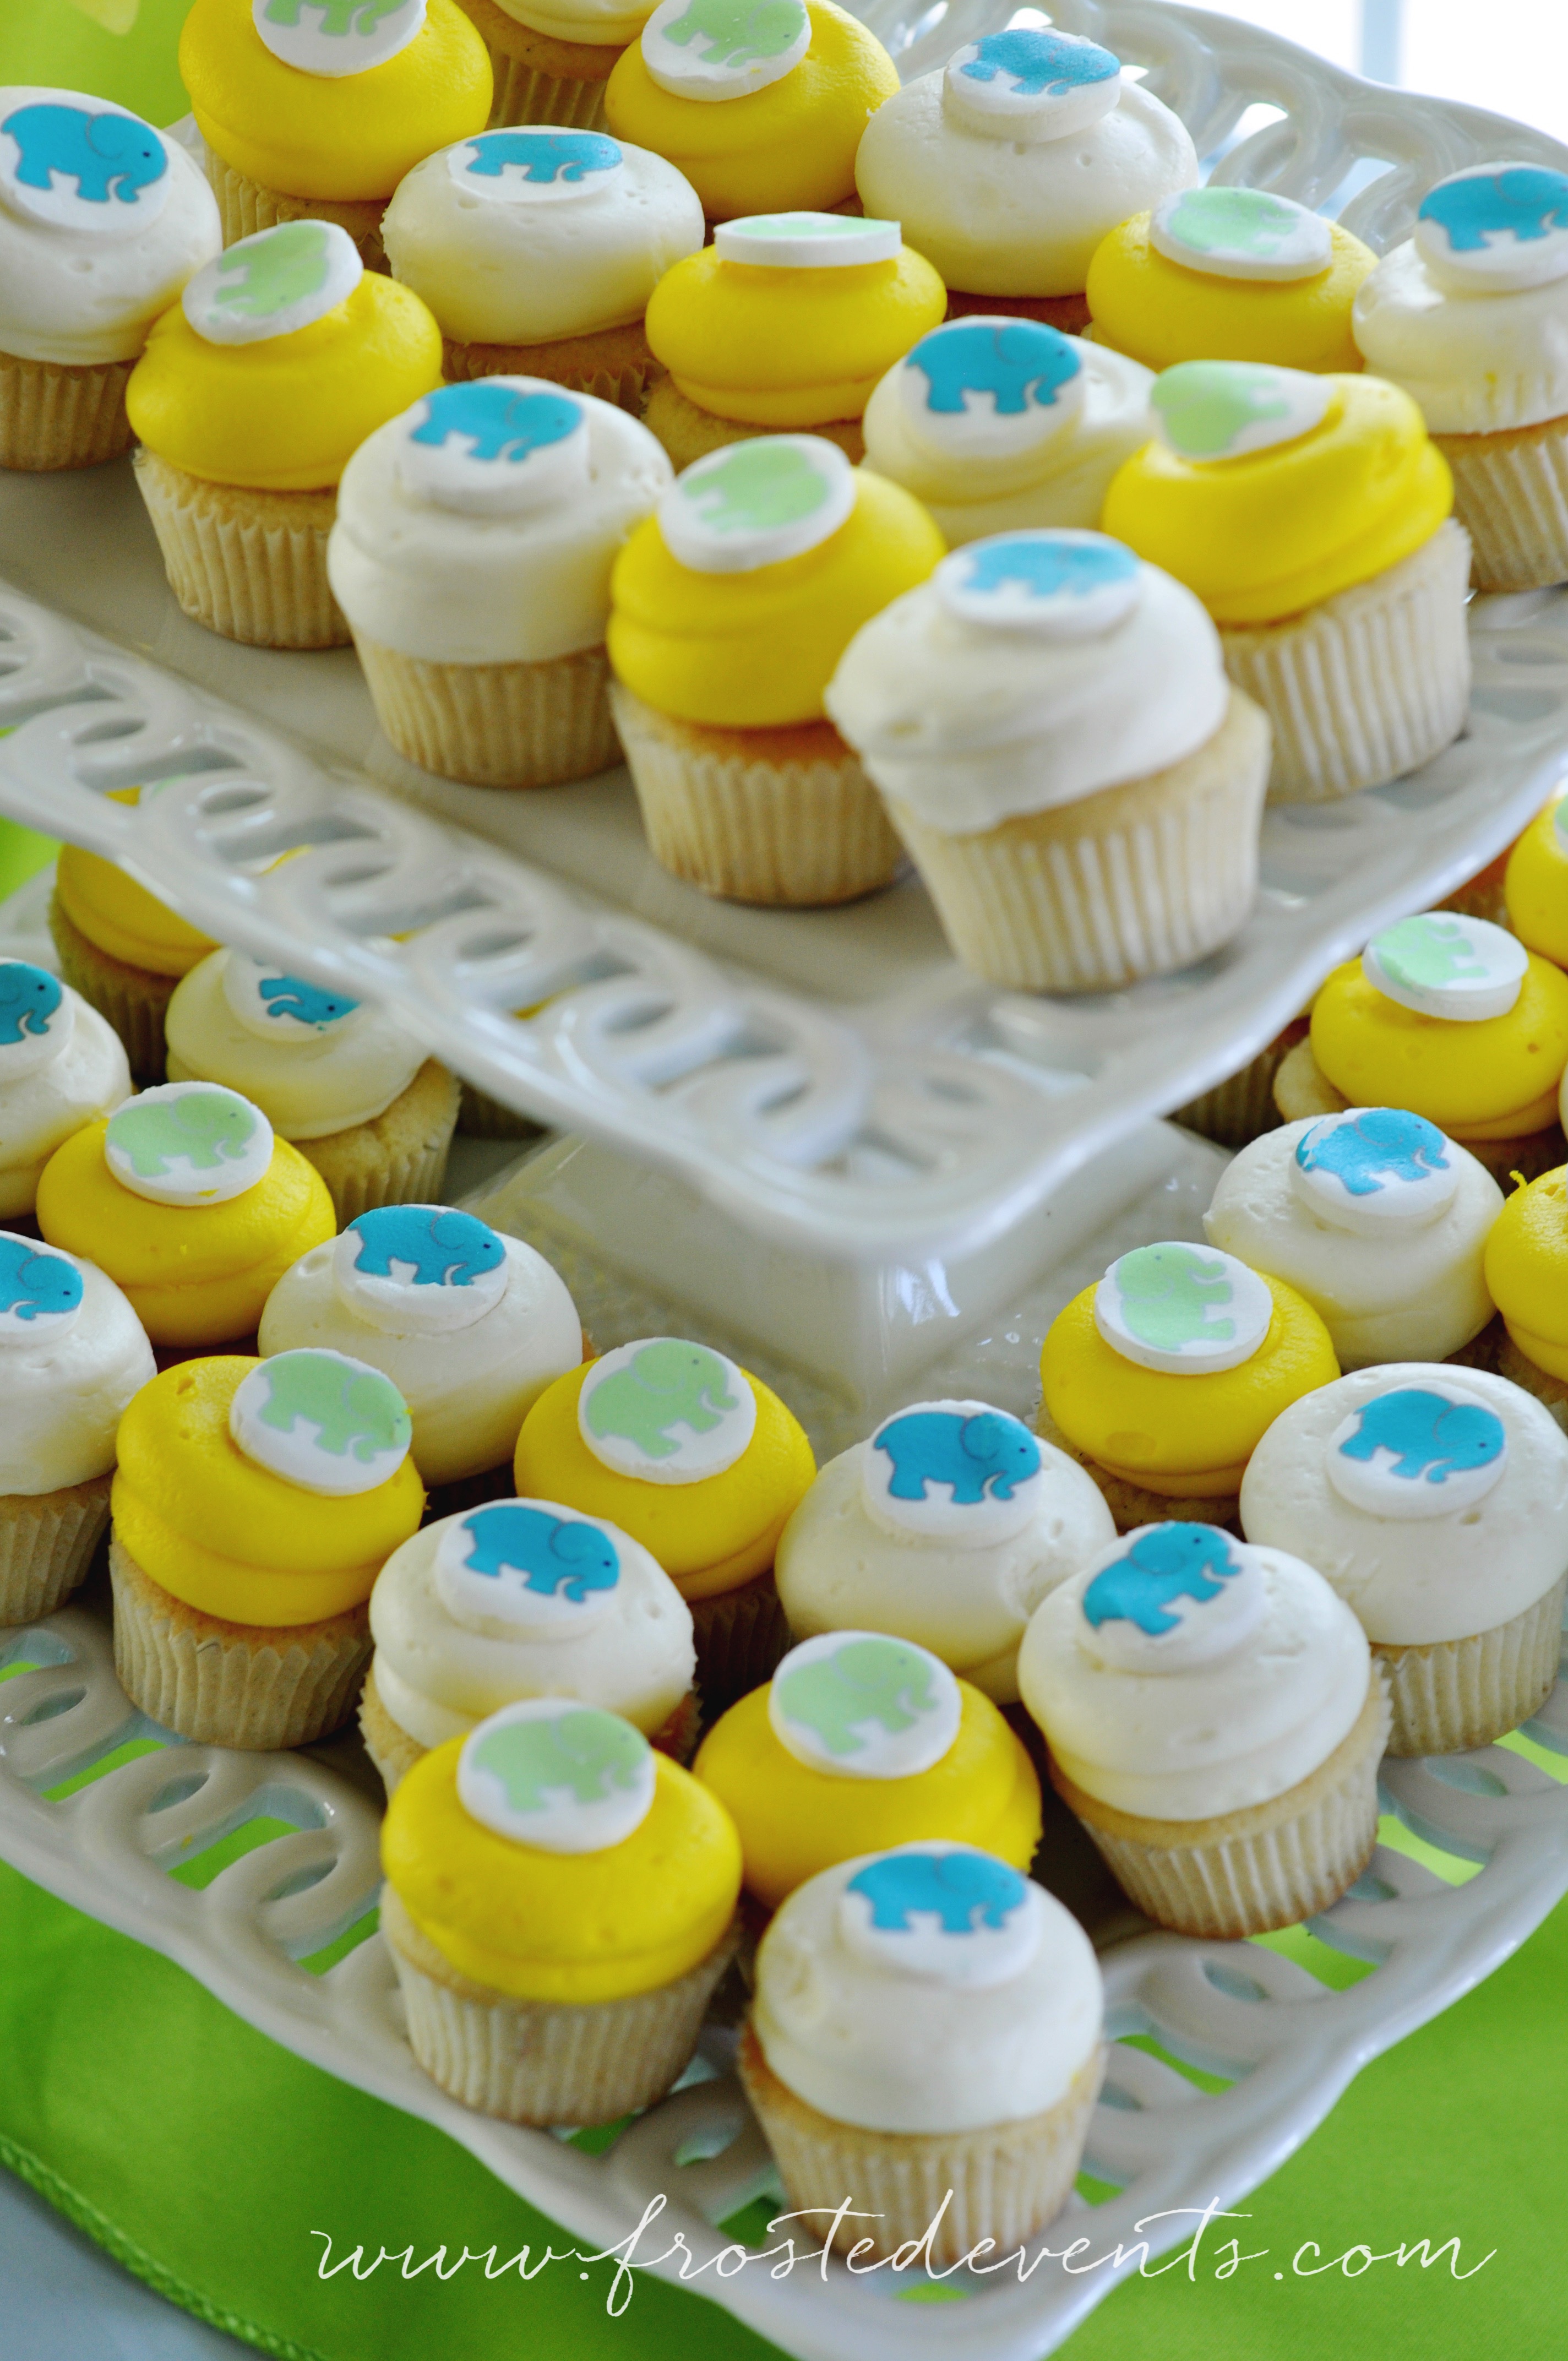 georgetown-cupcakes-bright-fun-first-birthday-party-josh-frostedeventscom-1